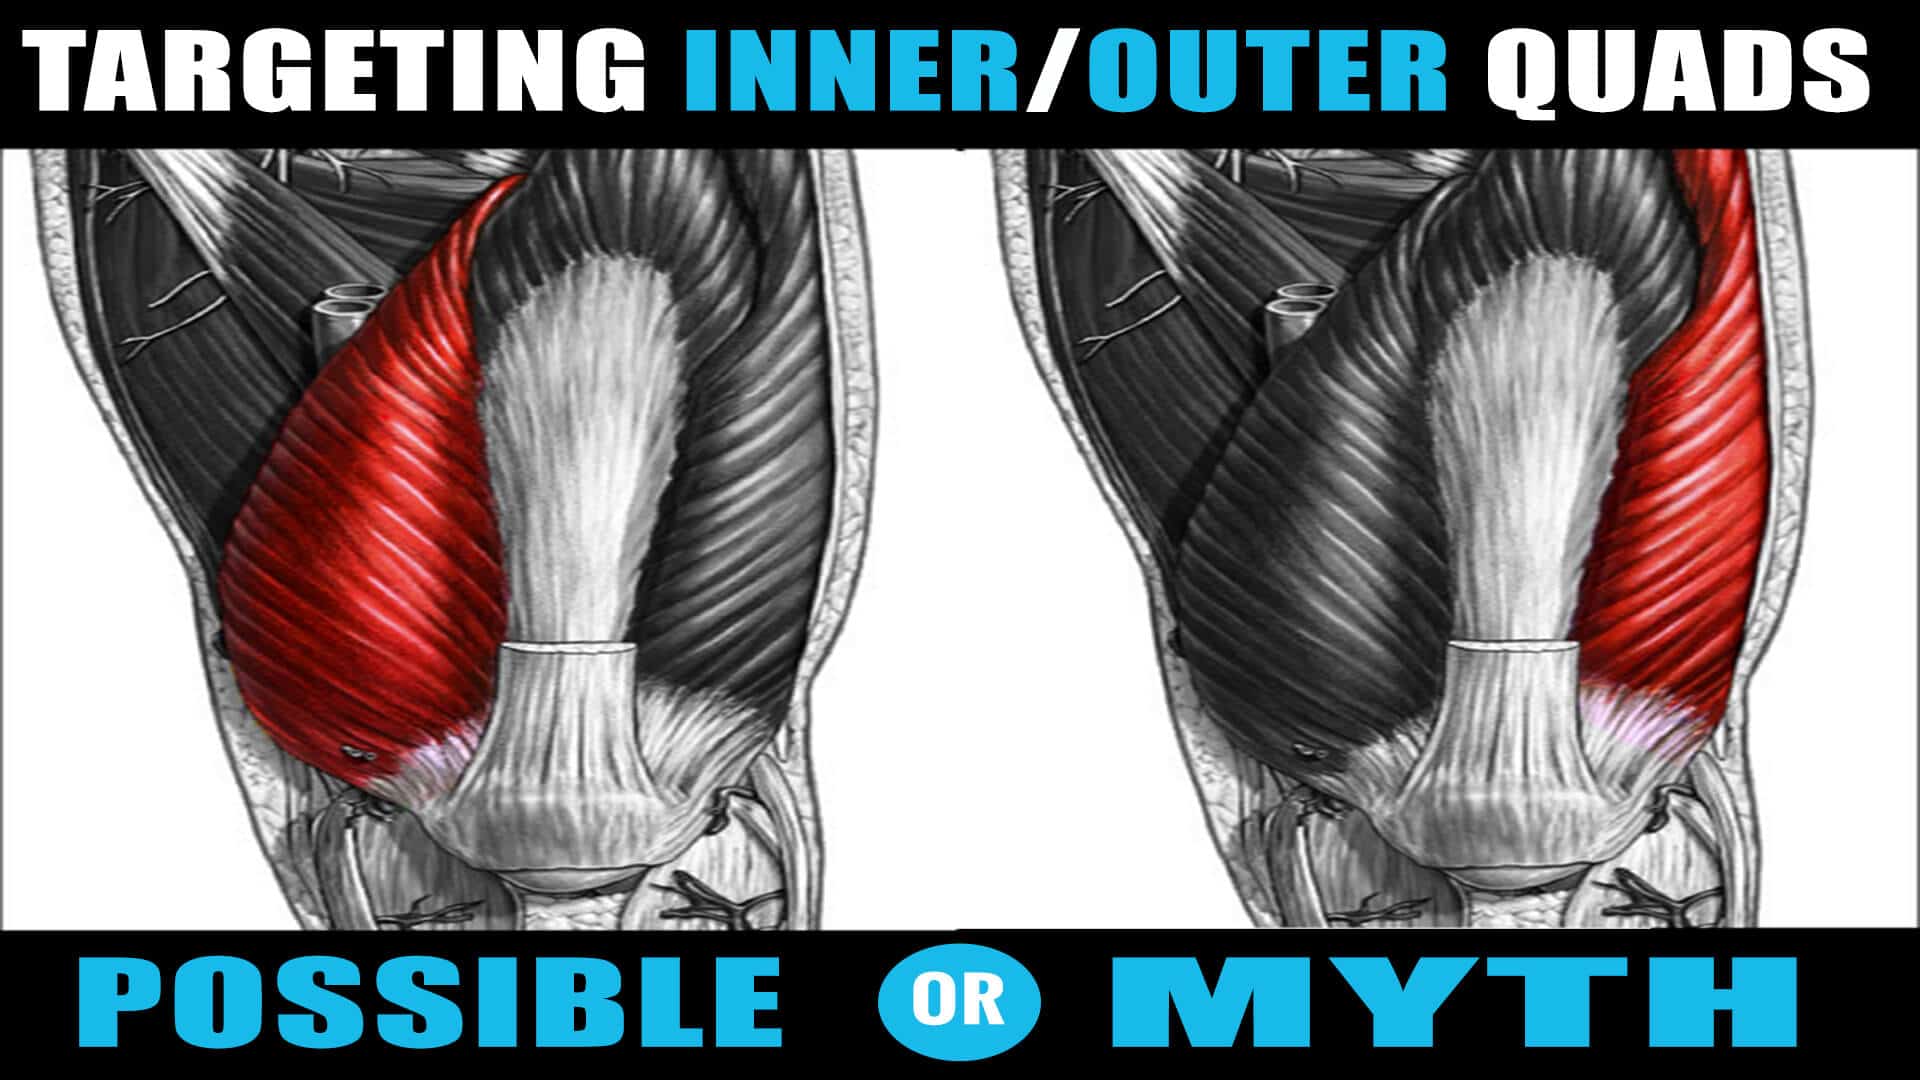 TARGETING INNER/OUTER QUADS | Possible or MYTH?